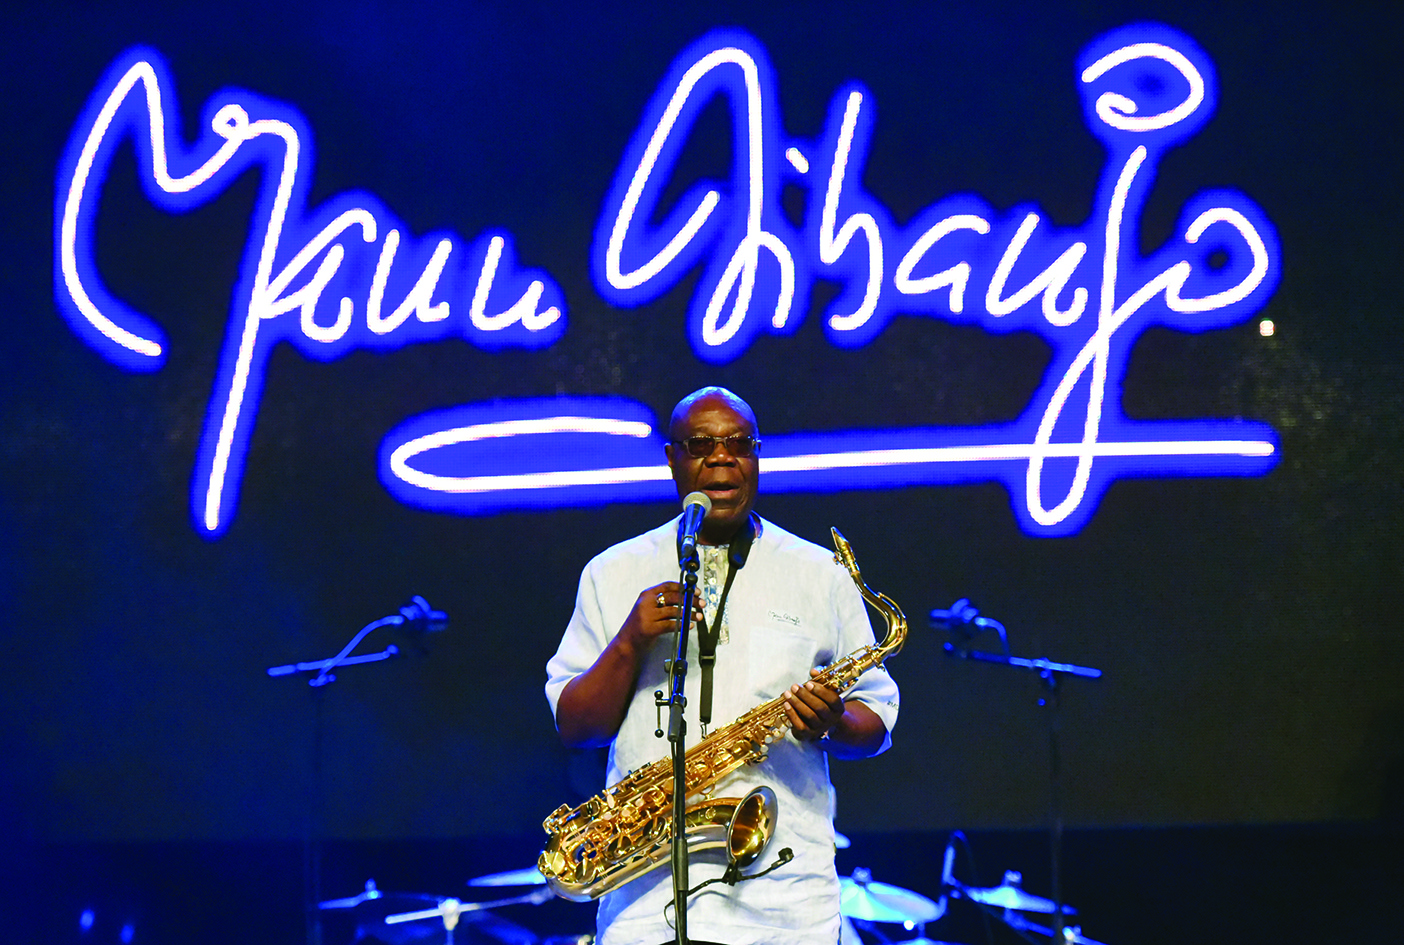 (FILES) In this file photo taken on June 30, 2018 Cameroon jazz saxophonist Manu Dibango performs during a concert at the Ivory Hotel in Abidjan. - Veteran Cameroon jazz star Dibango dies after contracting coronavirus, said his entourage en March 24, 2020. (Photo by Sia KAMBOU / AFP)